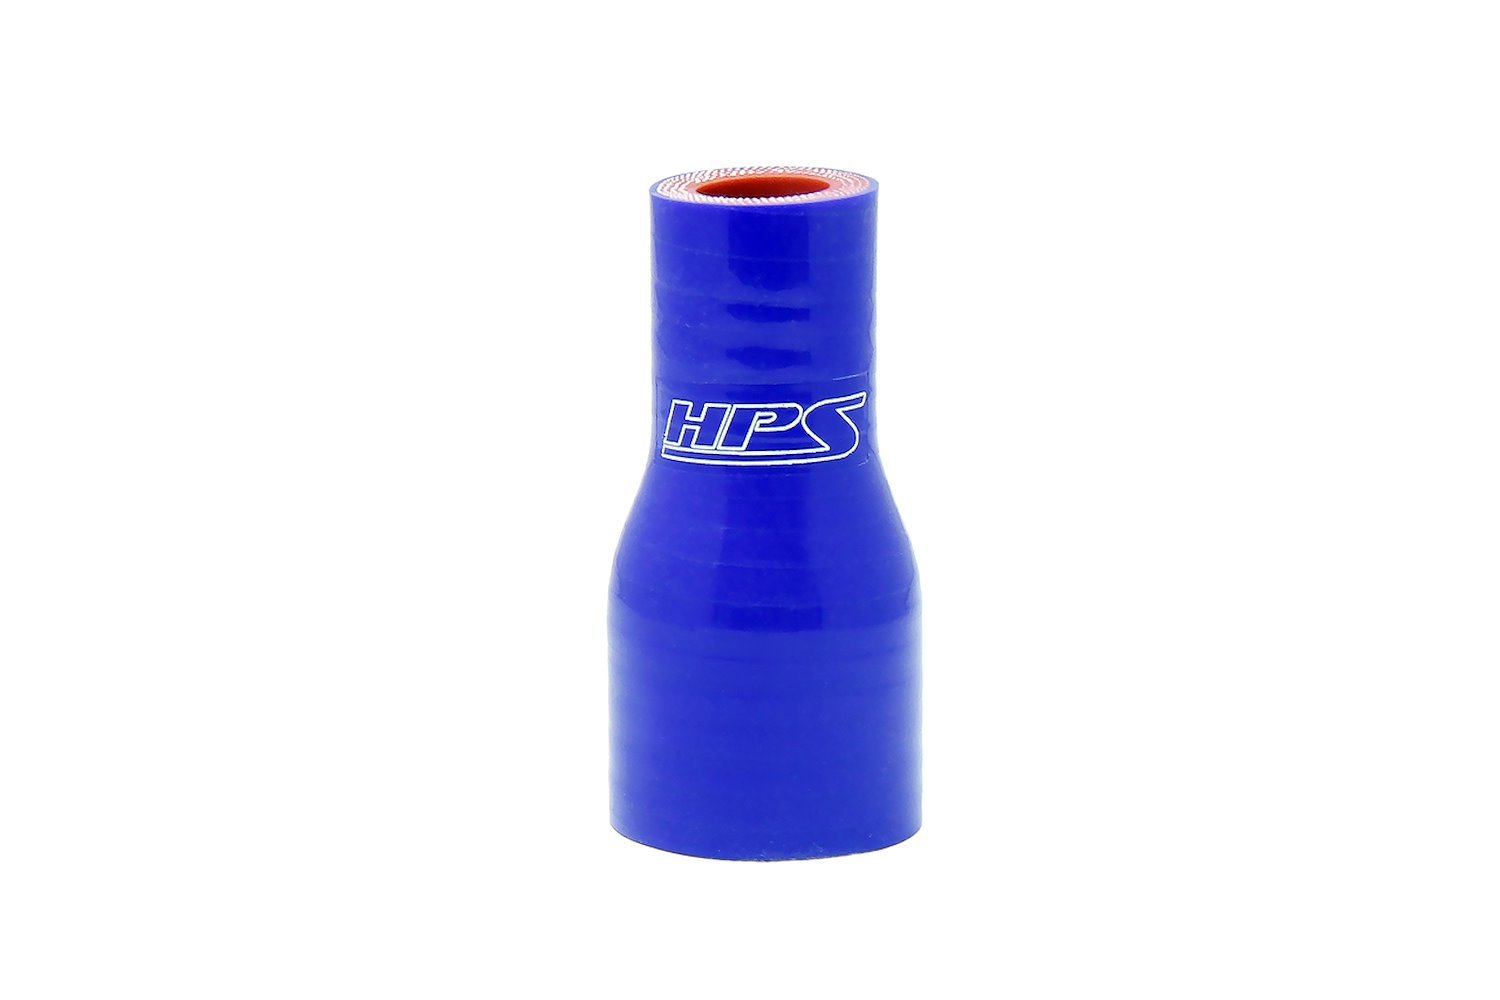 HTSR-100-112-BLUE Silicone Reducer Hose, High-Temp 4-Ply Reinforced, 1 in. - 1-1/8 in. ID, 3 in. Long, Blue